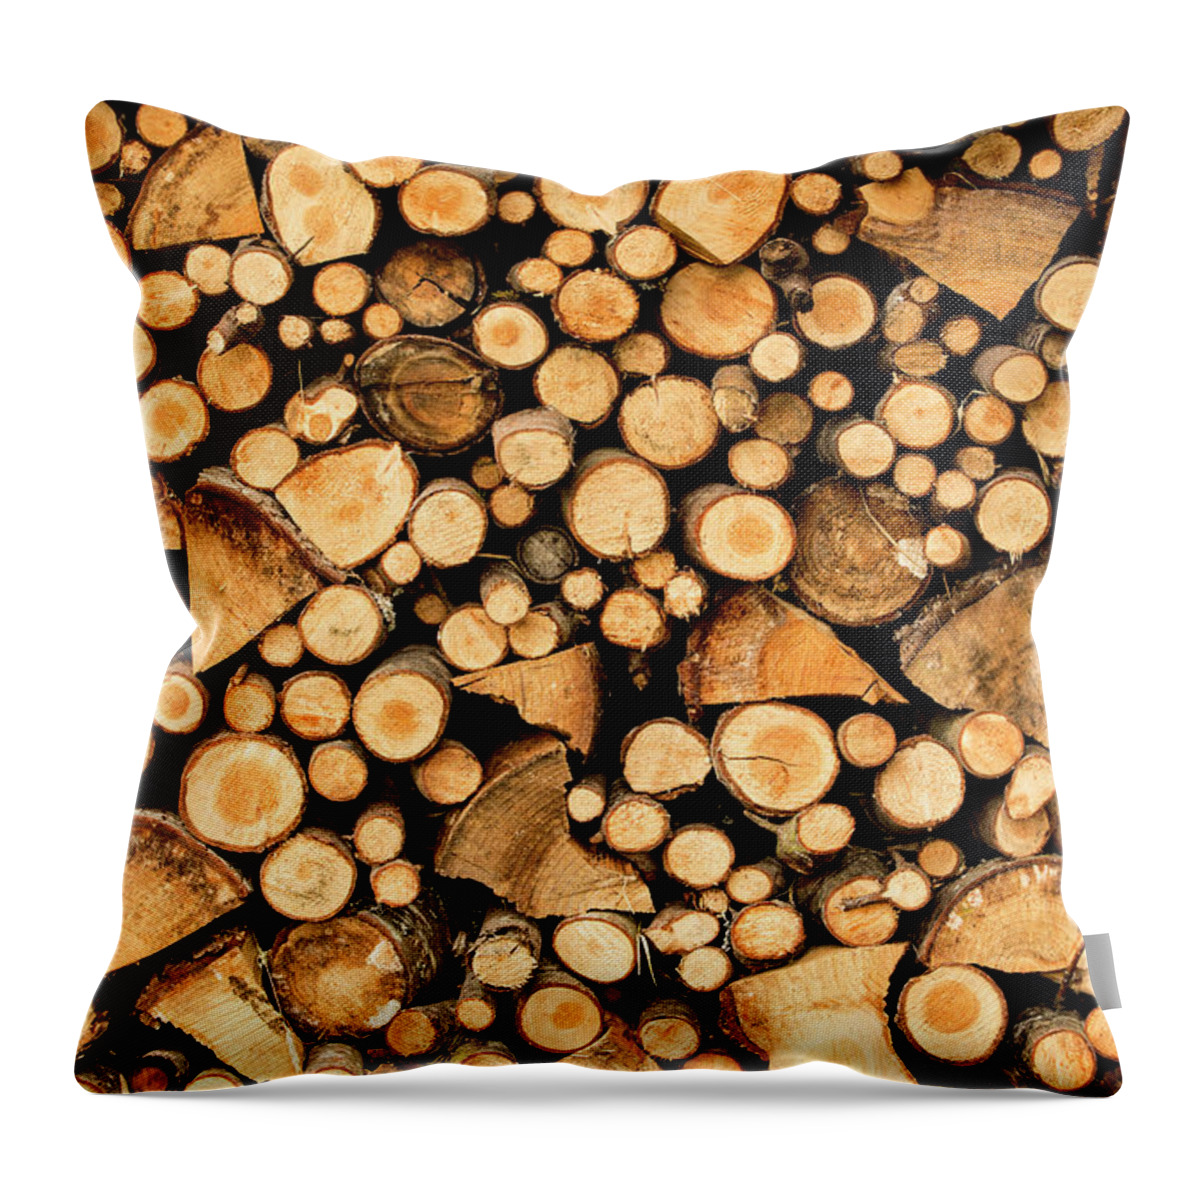 Non-urban Scene Throw Pillow featuring the photograph Densely Stacked Wood by Jtsorrell